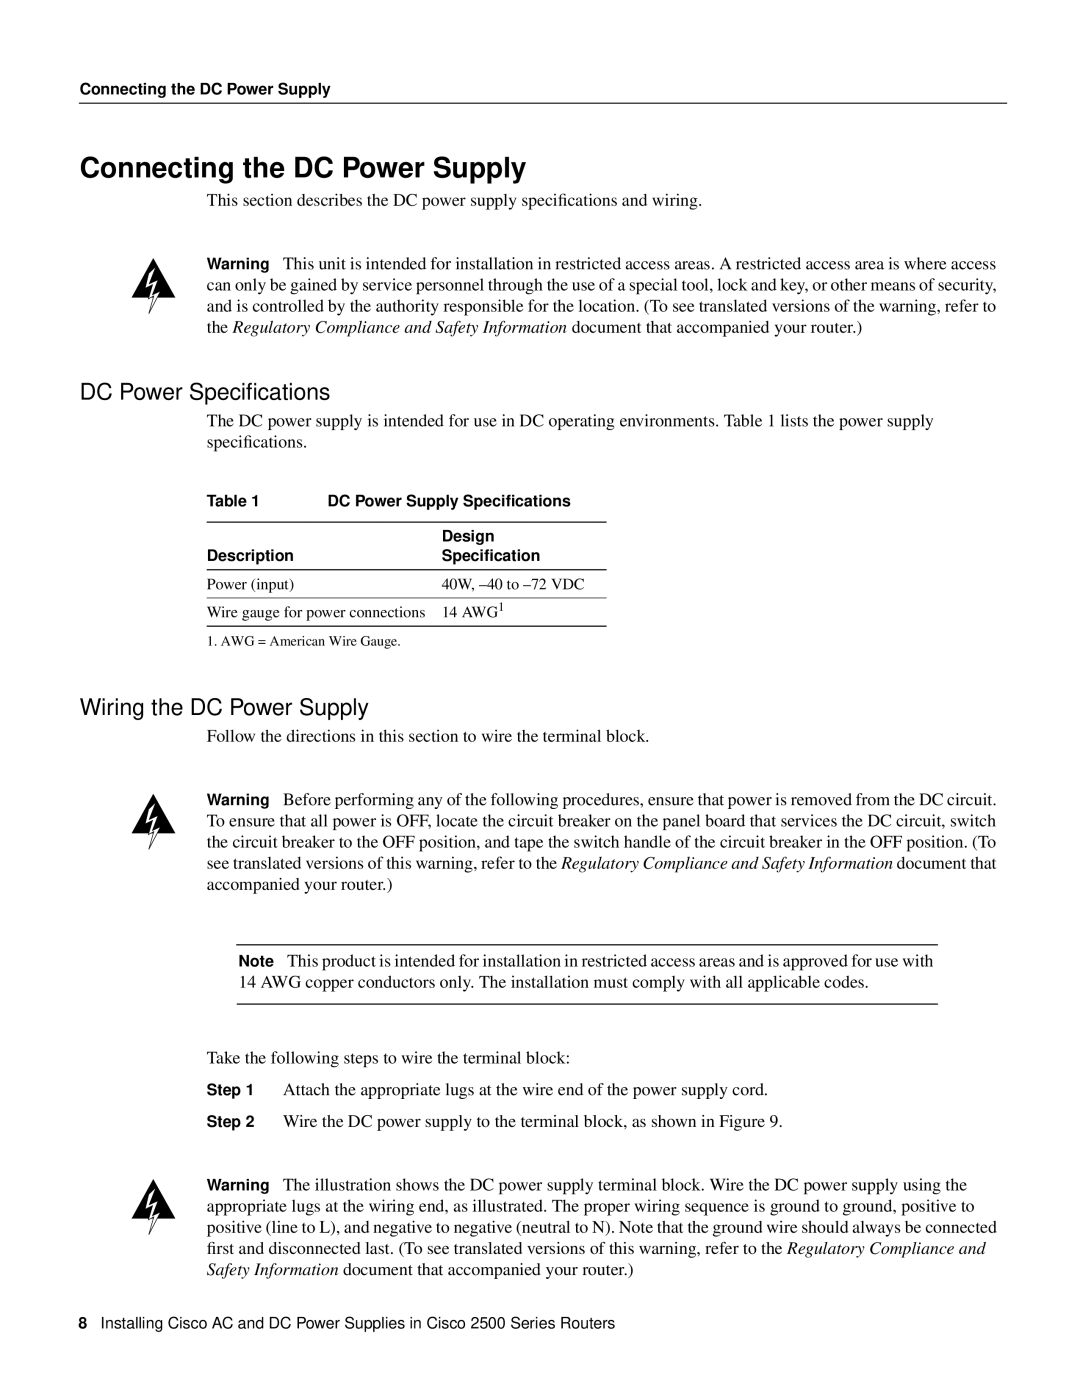 Cisco Systems 2500 Series manual Connecting the DC Power Supply, DC Power Speciﬁcations, Wiring the DC Power Supply 